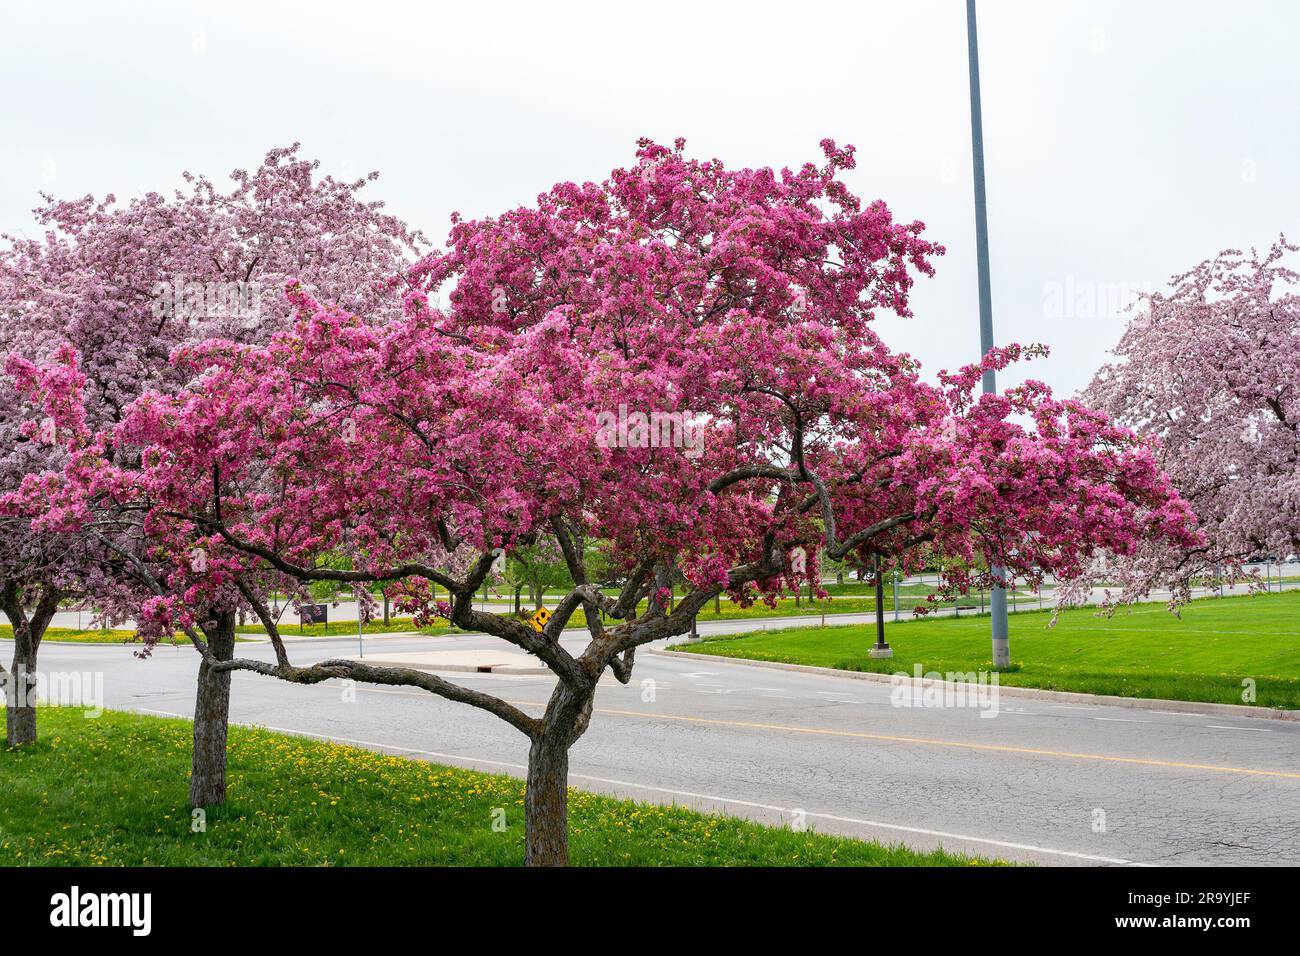 Cherry Blossom Cherry Blossom Time in Canada Province of Ontario Stock Photo